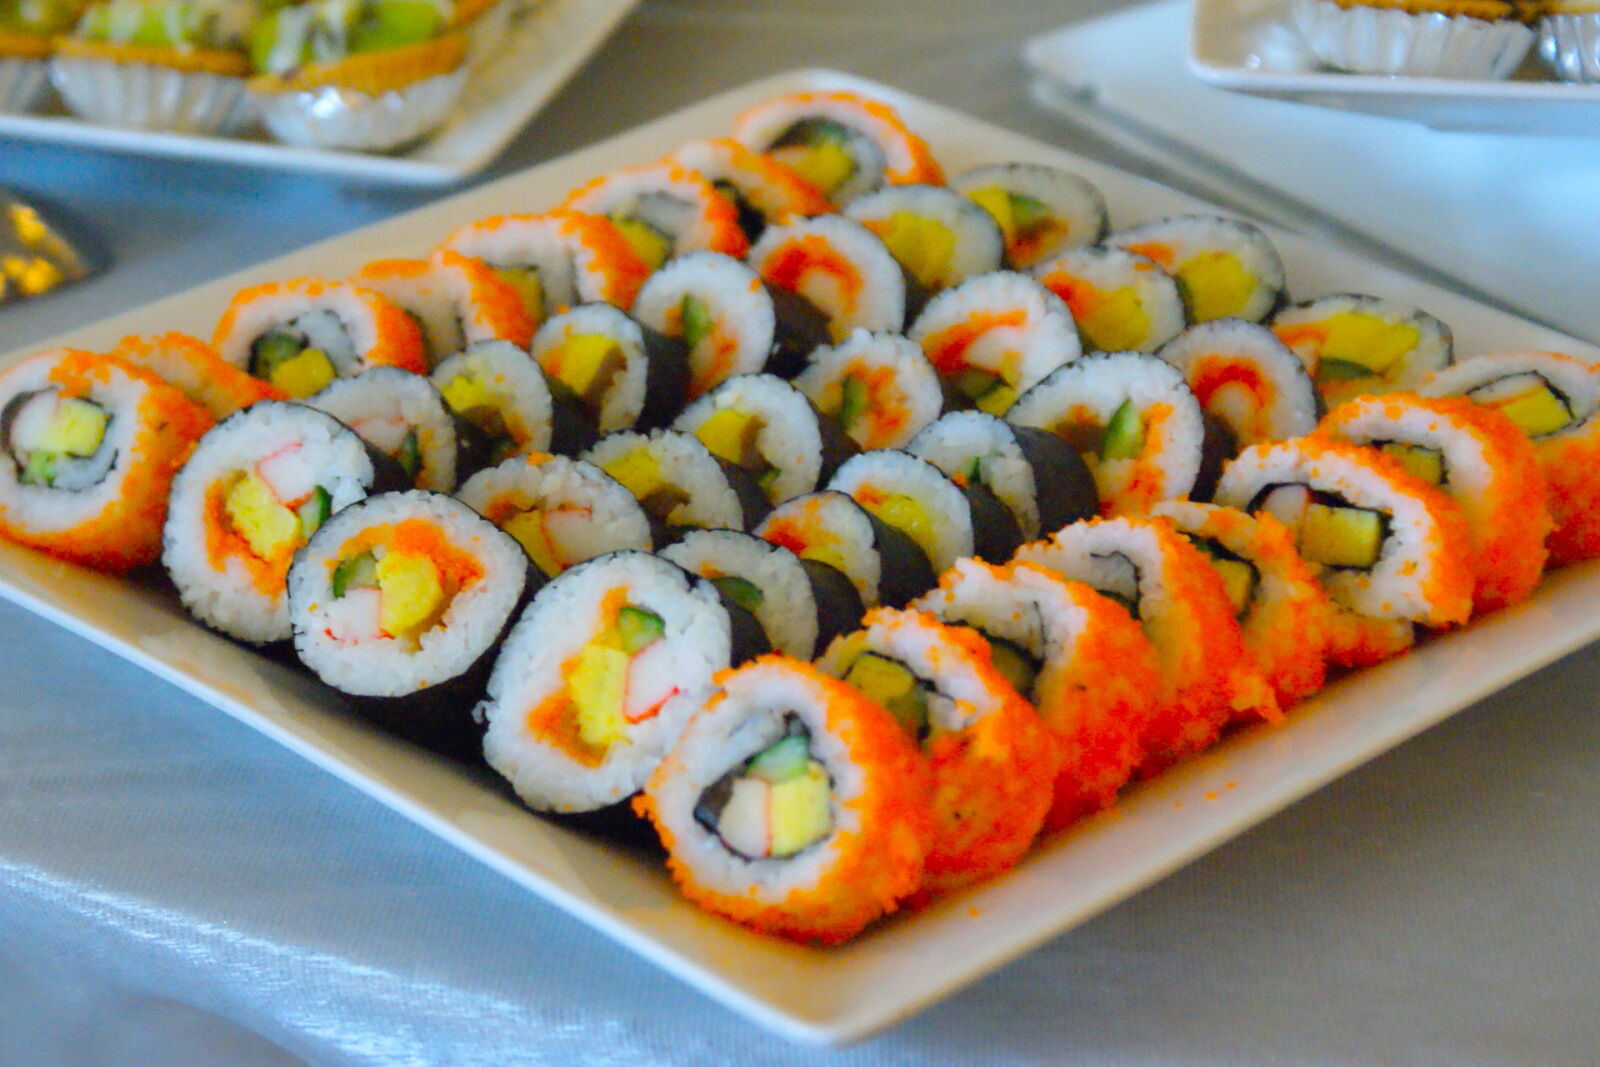 Sony DT 18-70mm F3.5-5.6 sample photo. Sushi photography